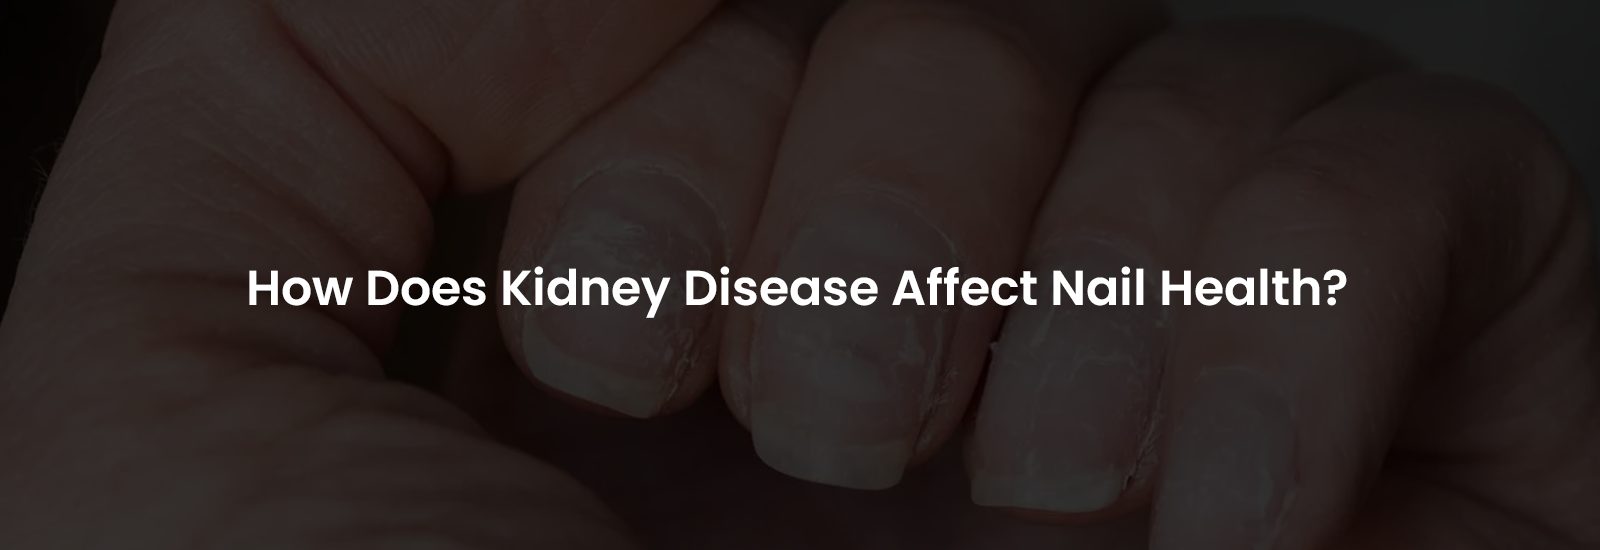 How Does Kidney Disease Affect Nail Health | Banner Image